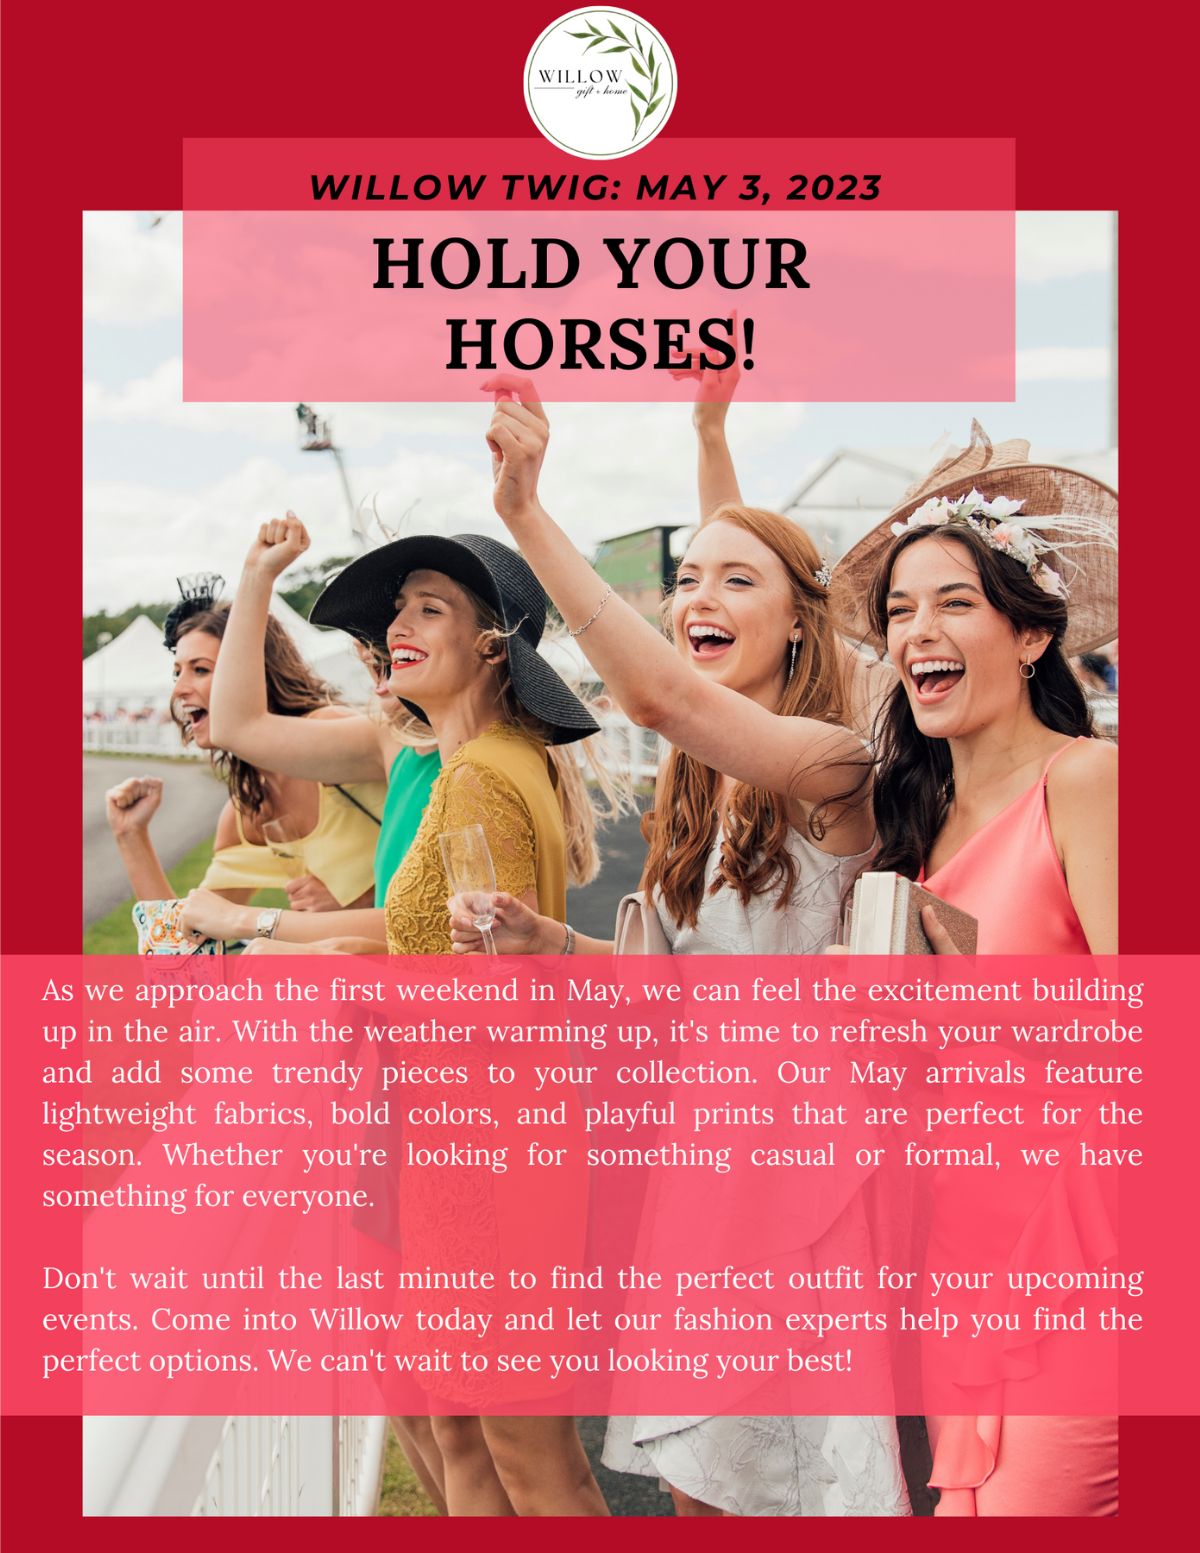 Hold your horses - Kentucky Derby